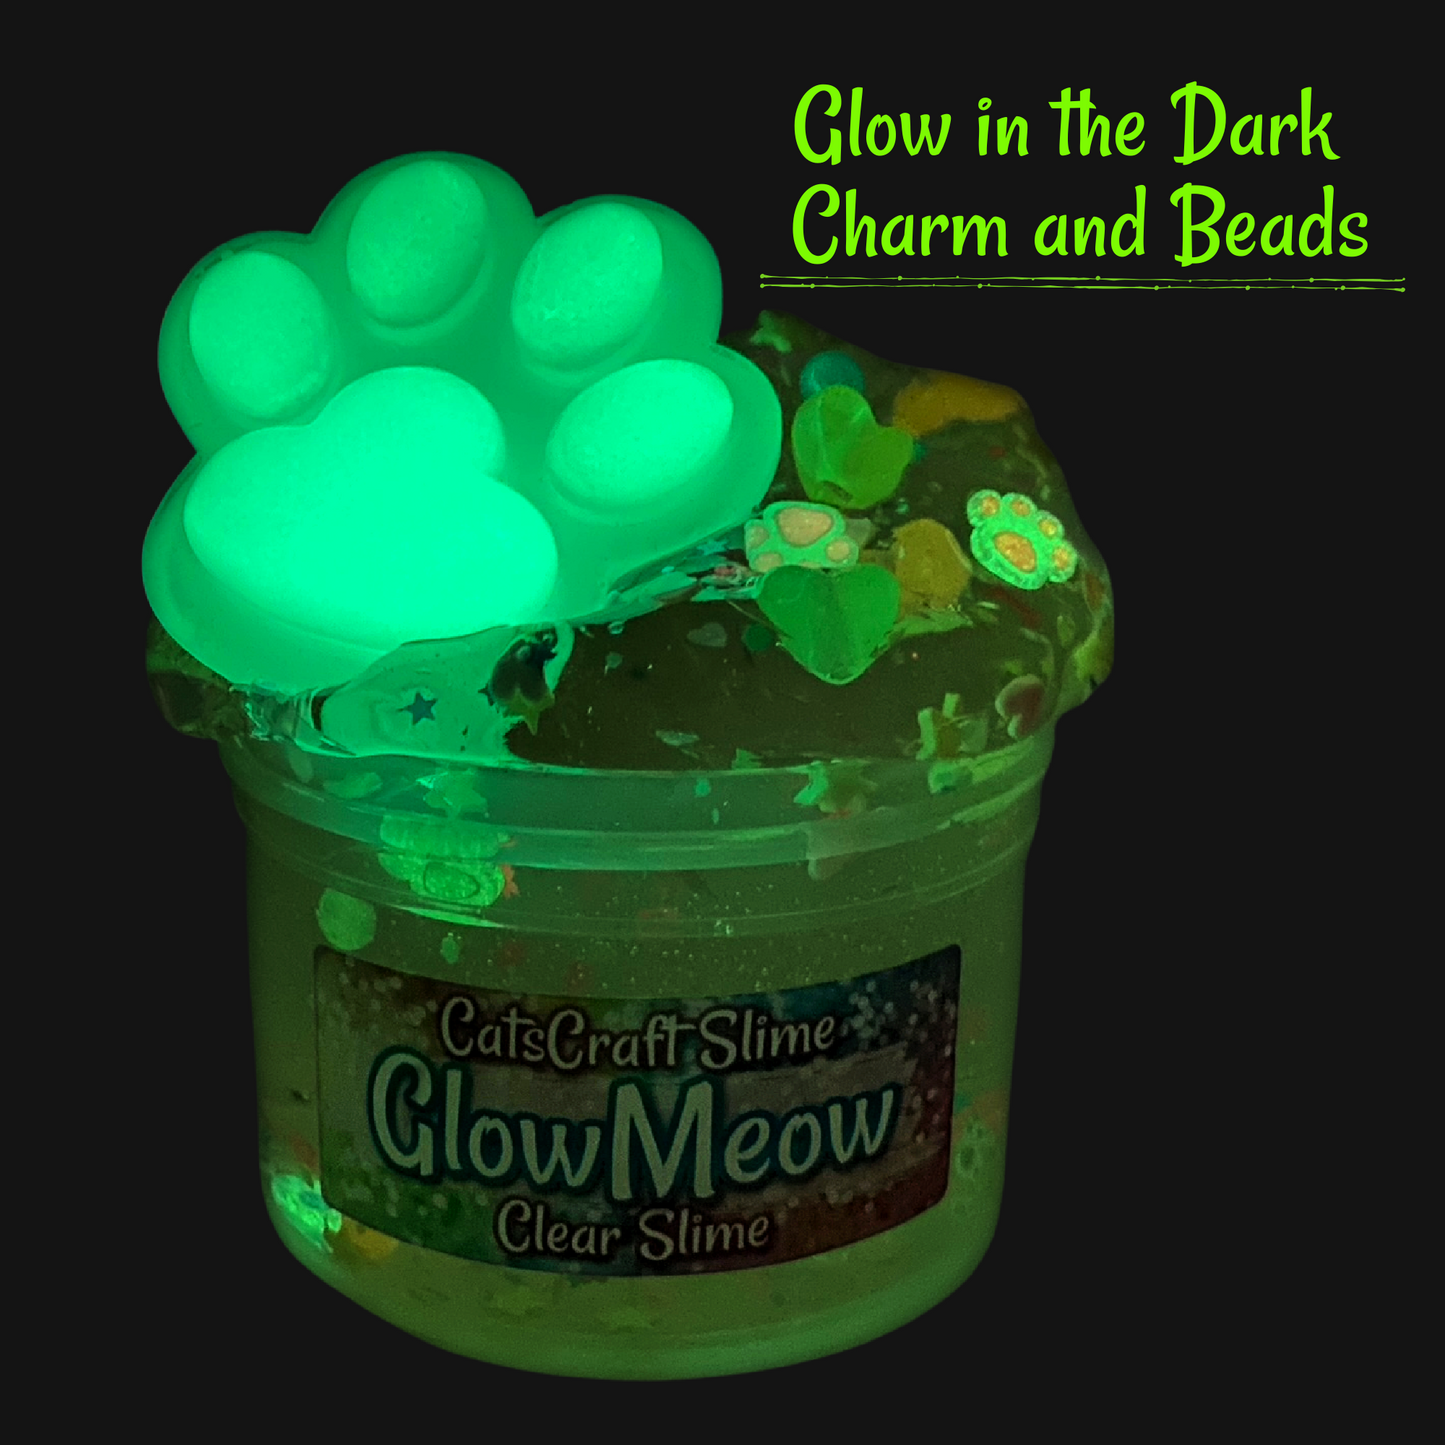 Clear Slime "Glowmeow" Scented Stretchy Glow in the dark beads in Slime ASMR 6 oz